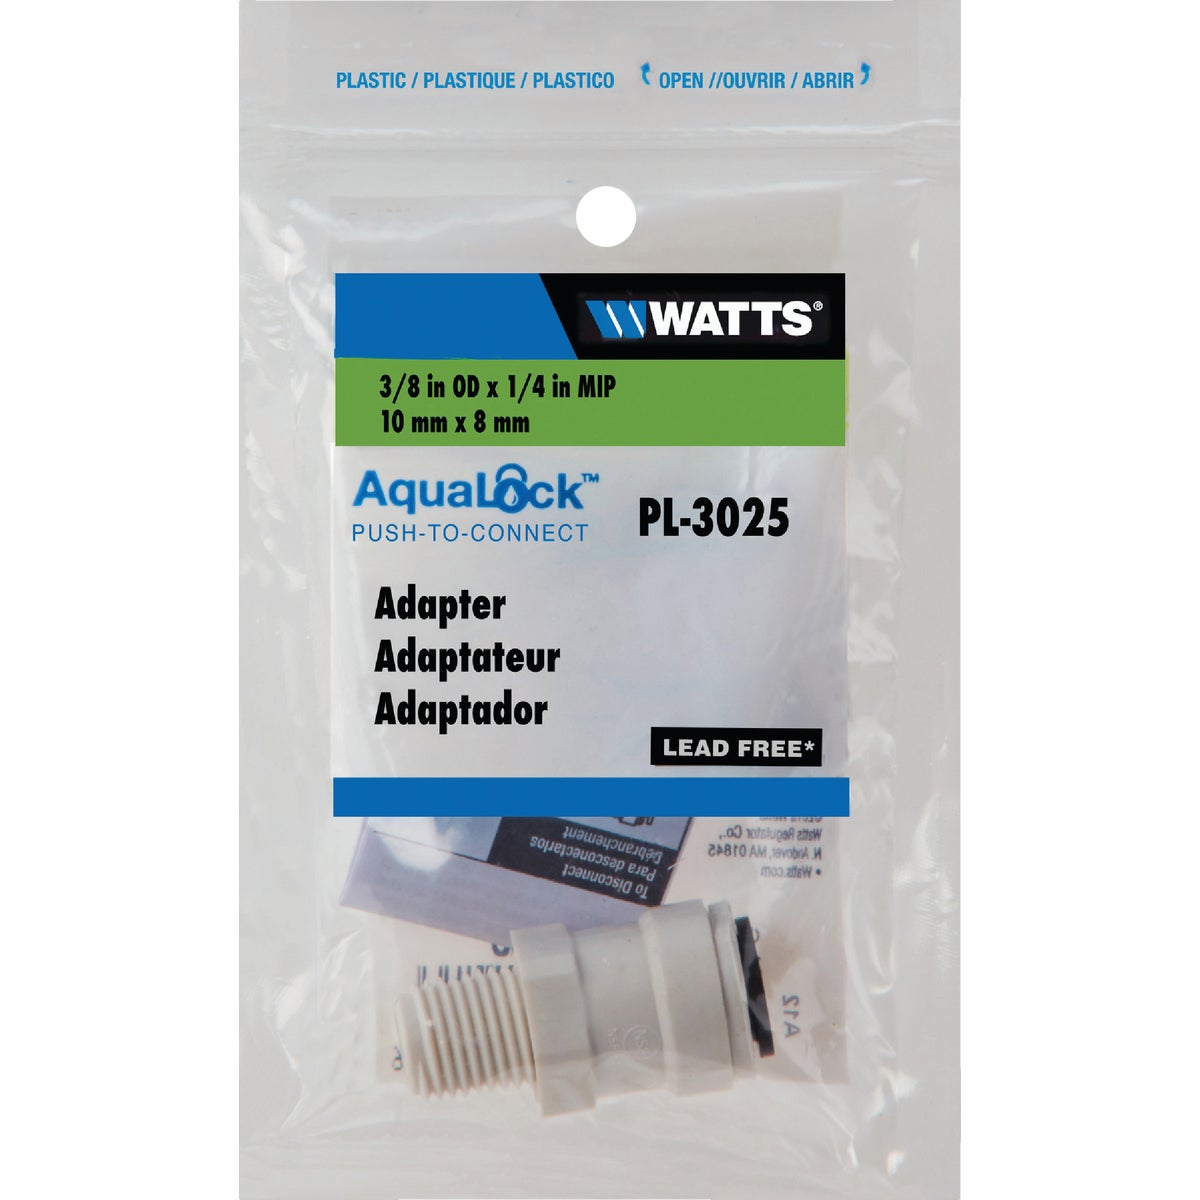 Watts Aqualock 3/8 In. OD x 1/4 In. MPT Push-to-Connect Plastic Adapter